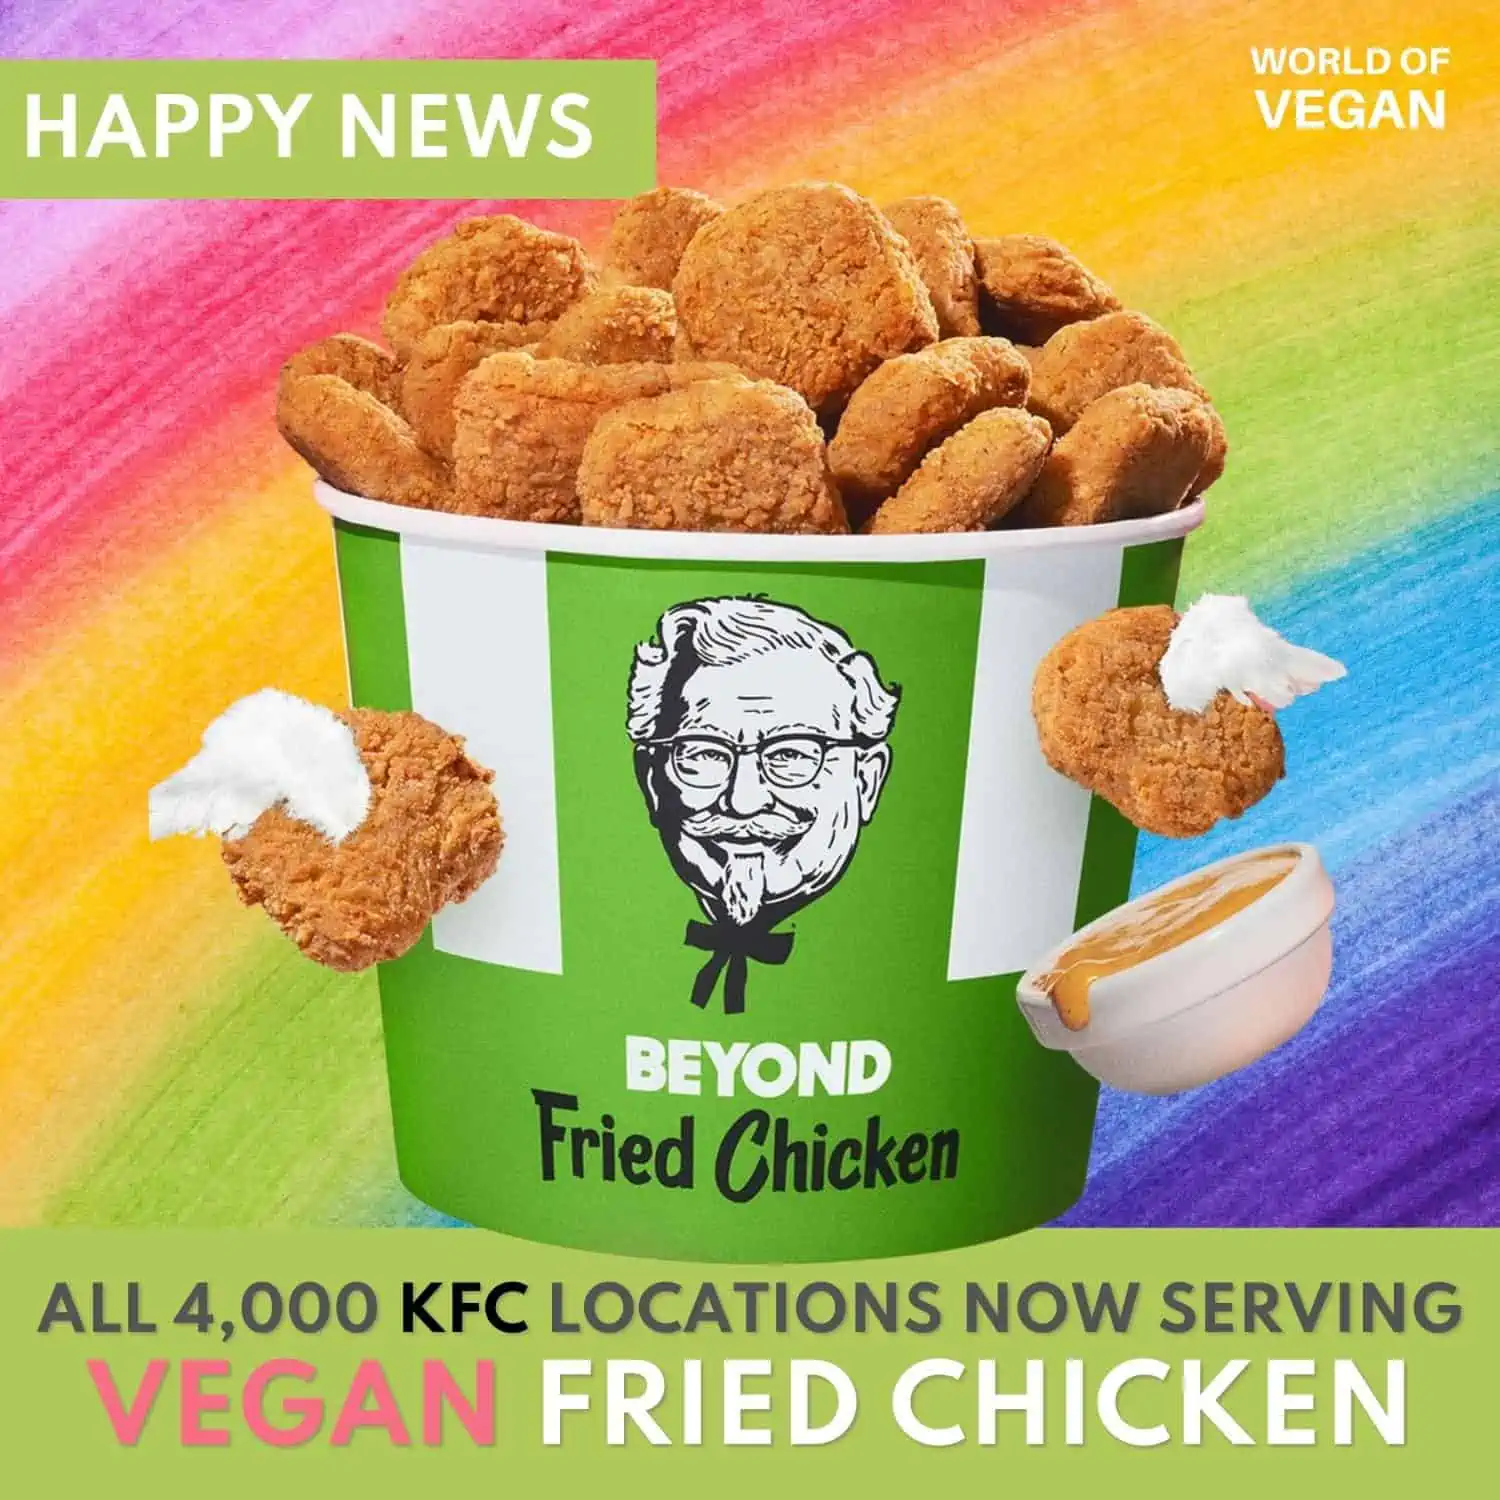 Vegan KFC beyond fried chicken launches in the US new graphic.